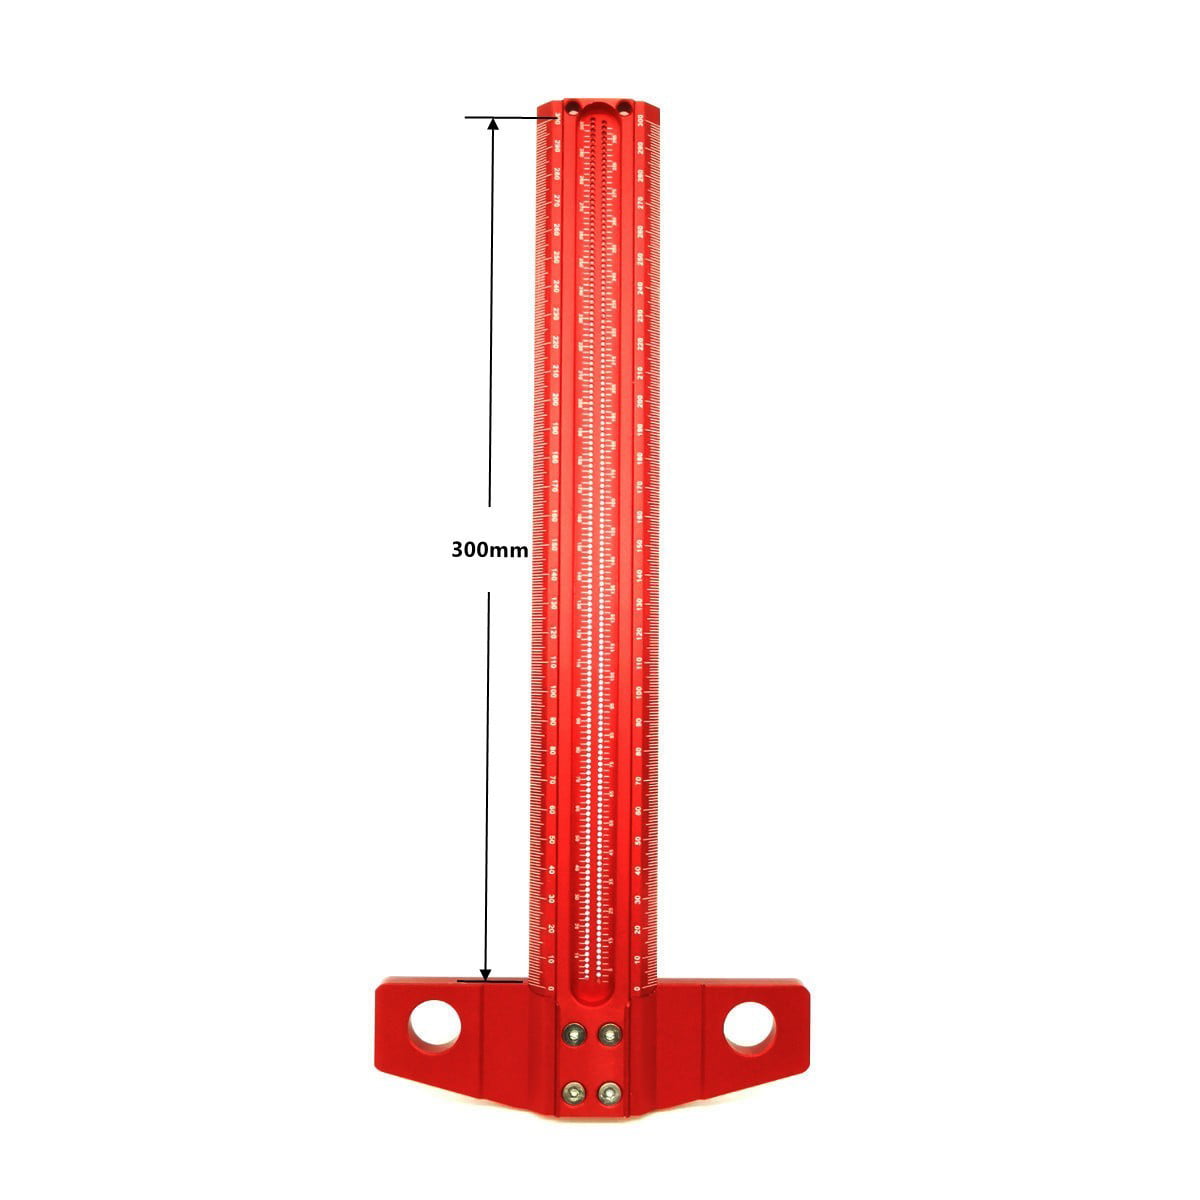 Scribing Ruler Measuring Ruler High Accuracy Aluminum Alloy Marking Tool for DIY Enthusiasts Woodworking Projects 